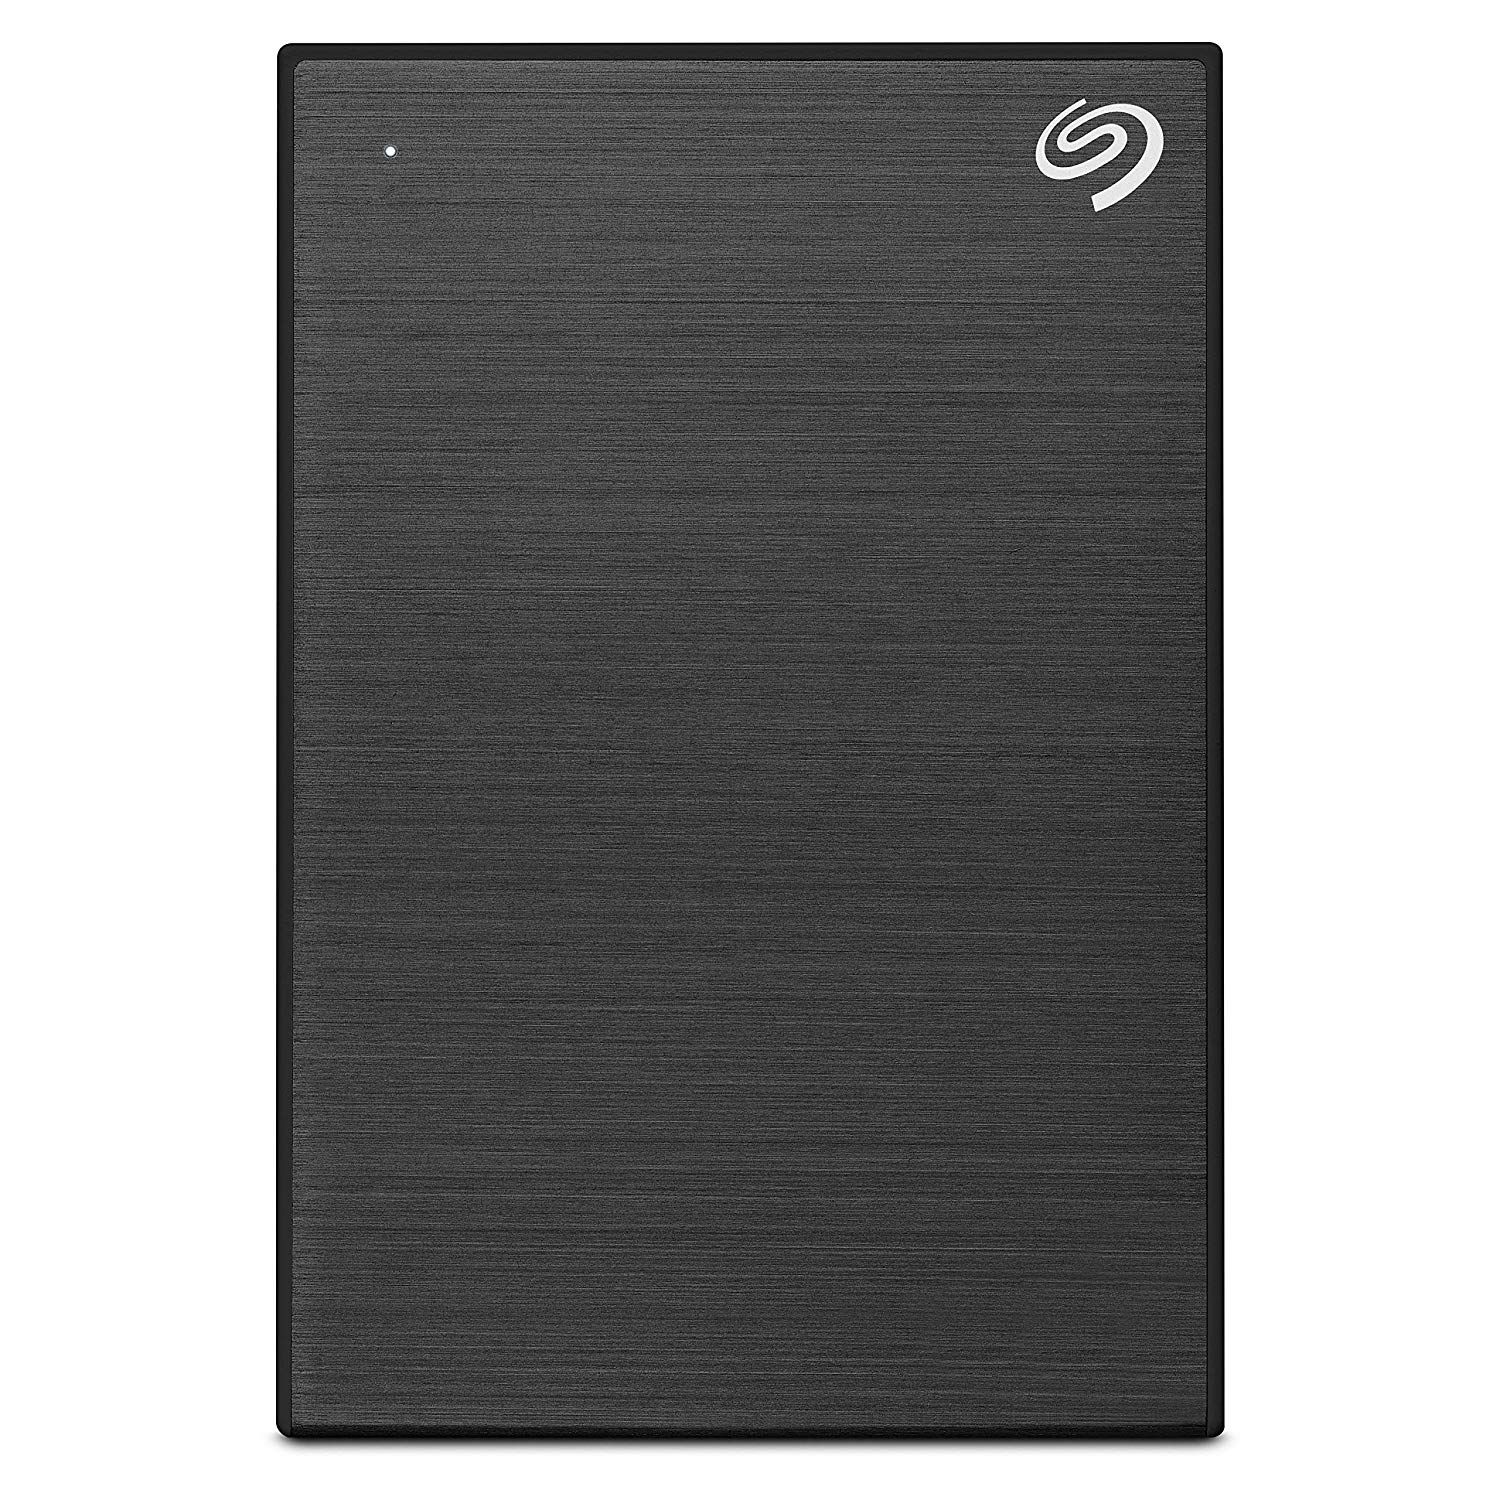 install seagate slim for mac and pc